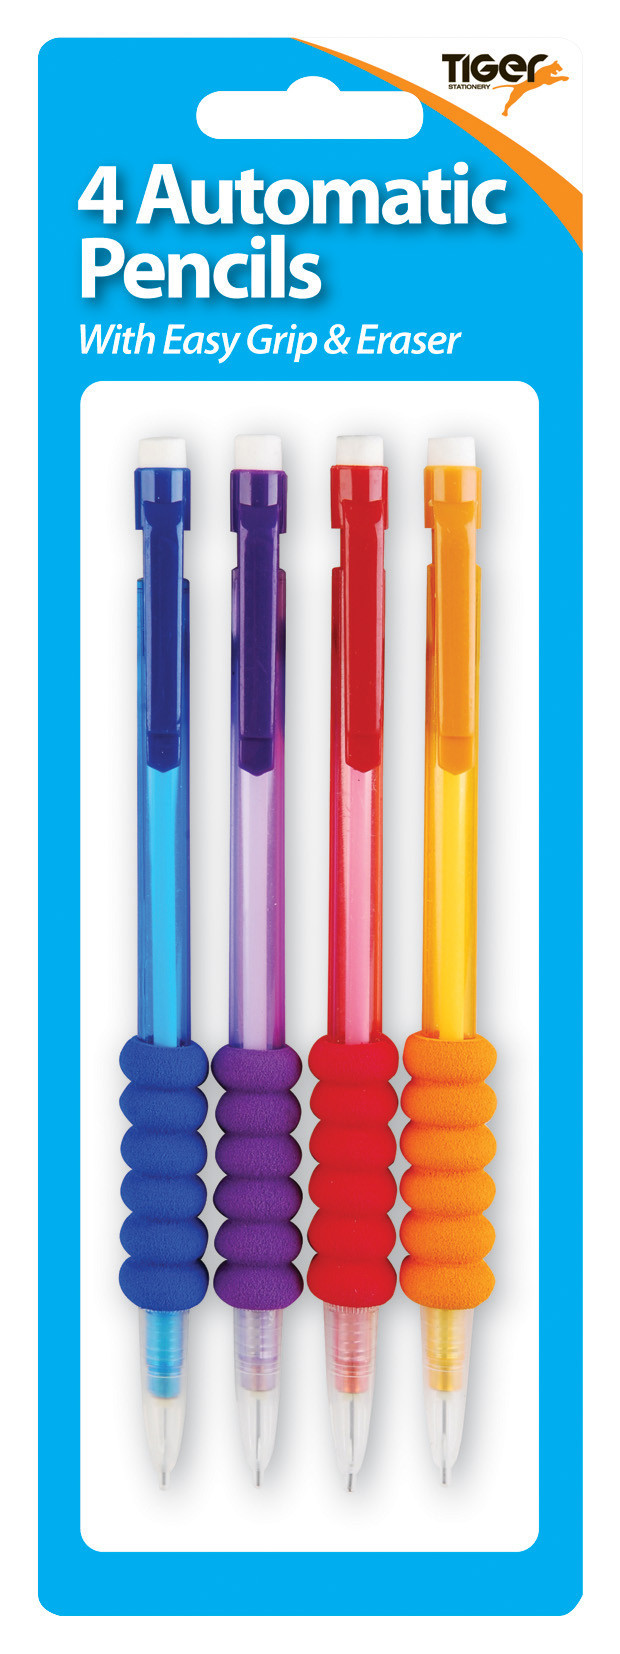 Blister Carded Automatic Pencils (4)